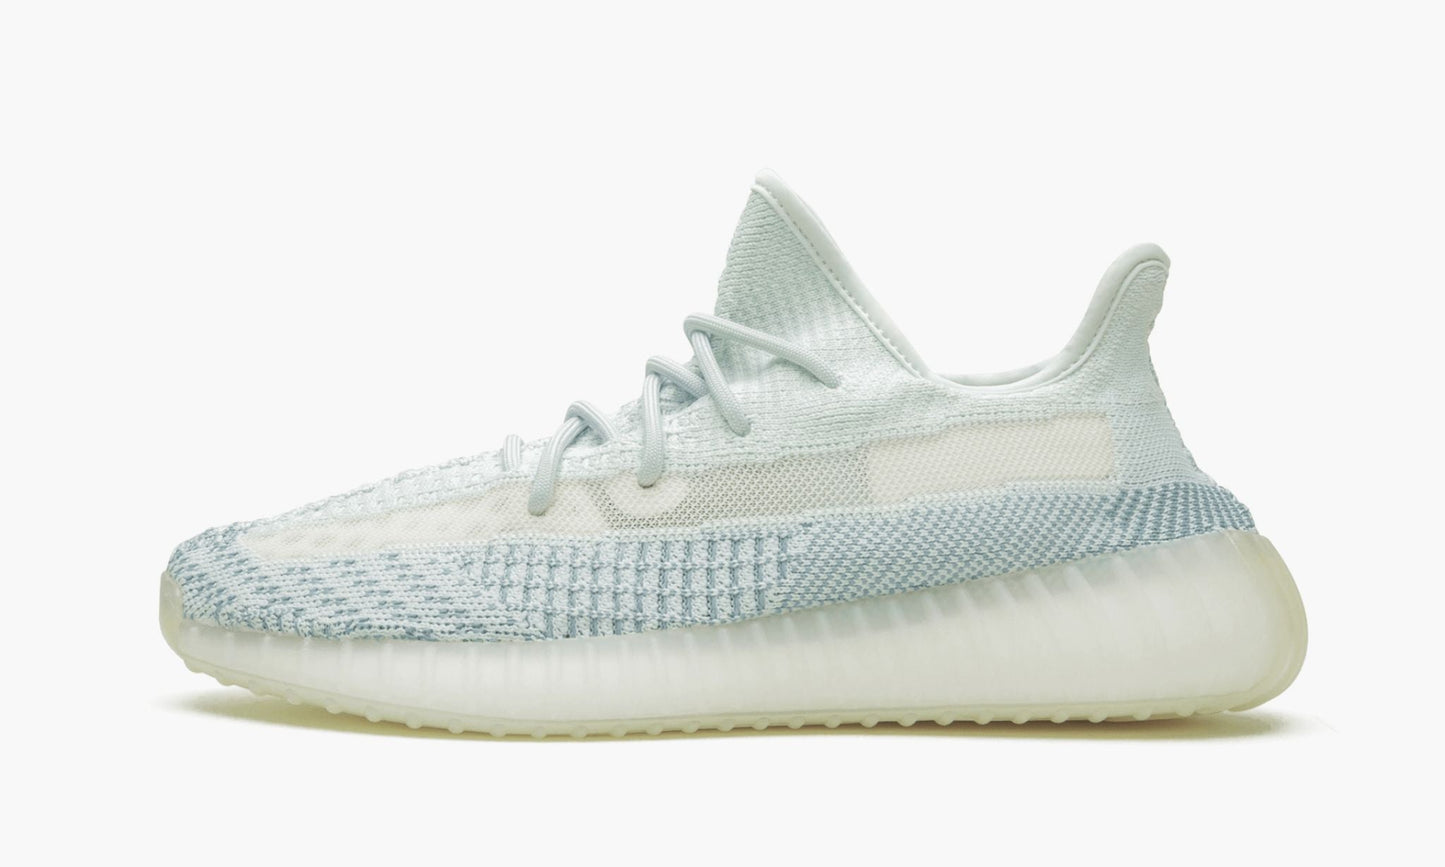 Yeezy Boost 350 V2 "Cloud White"